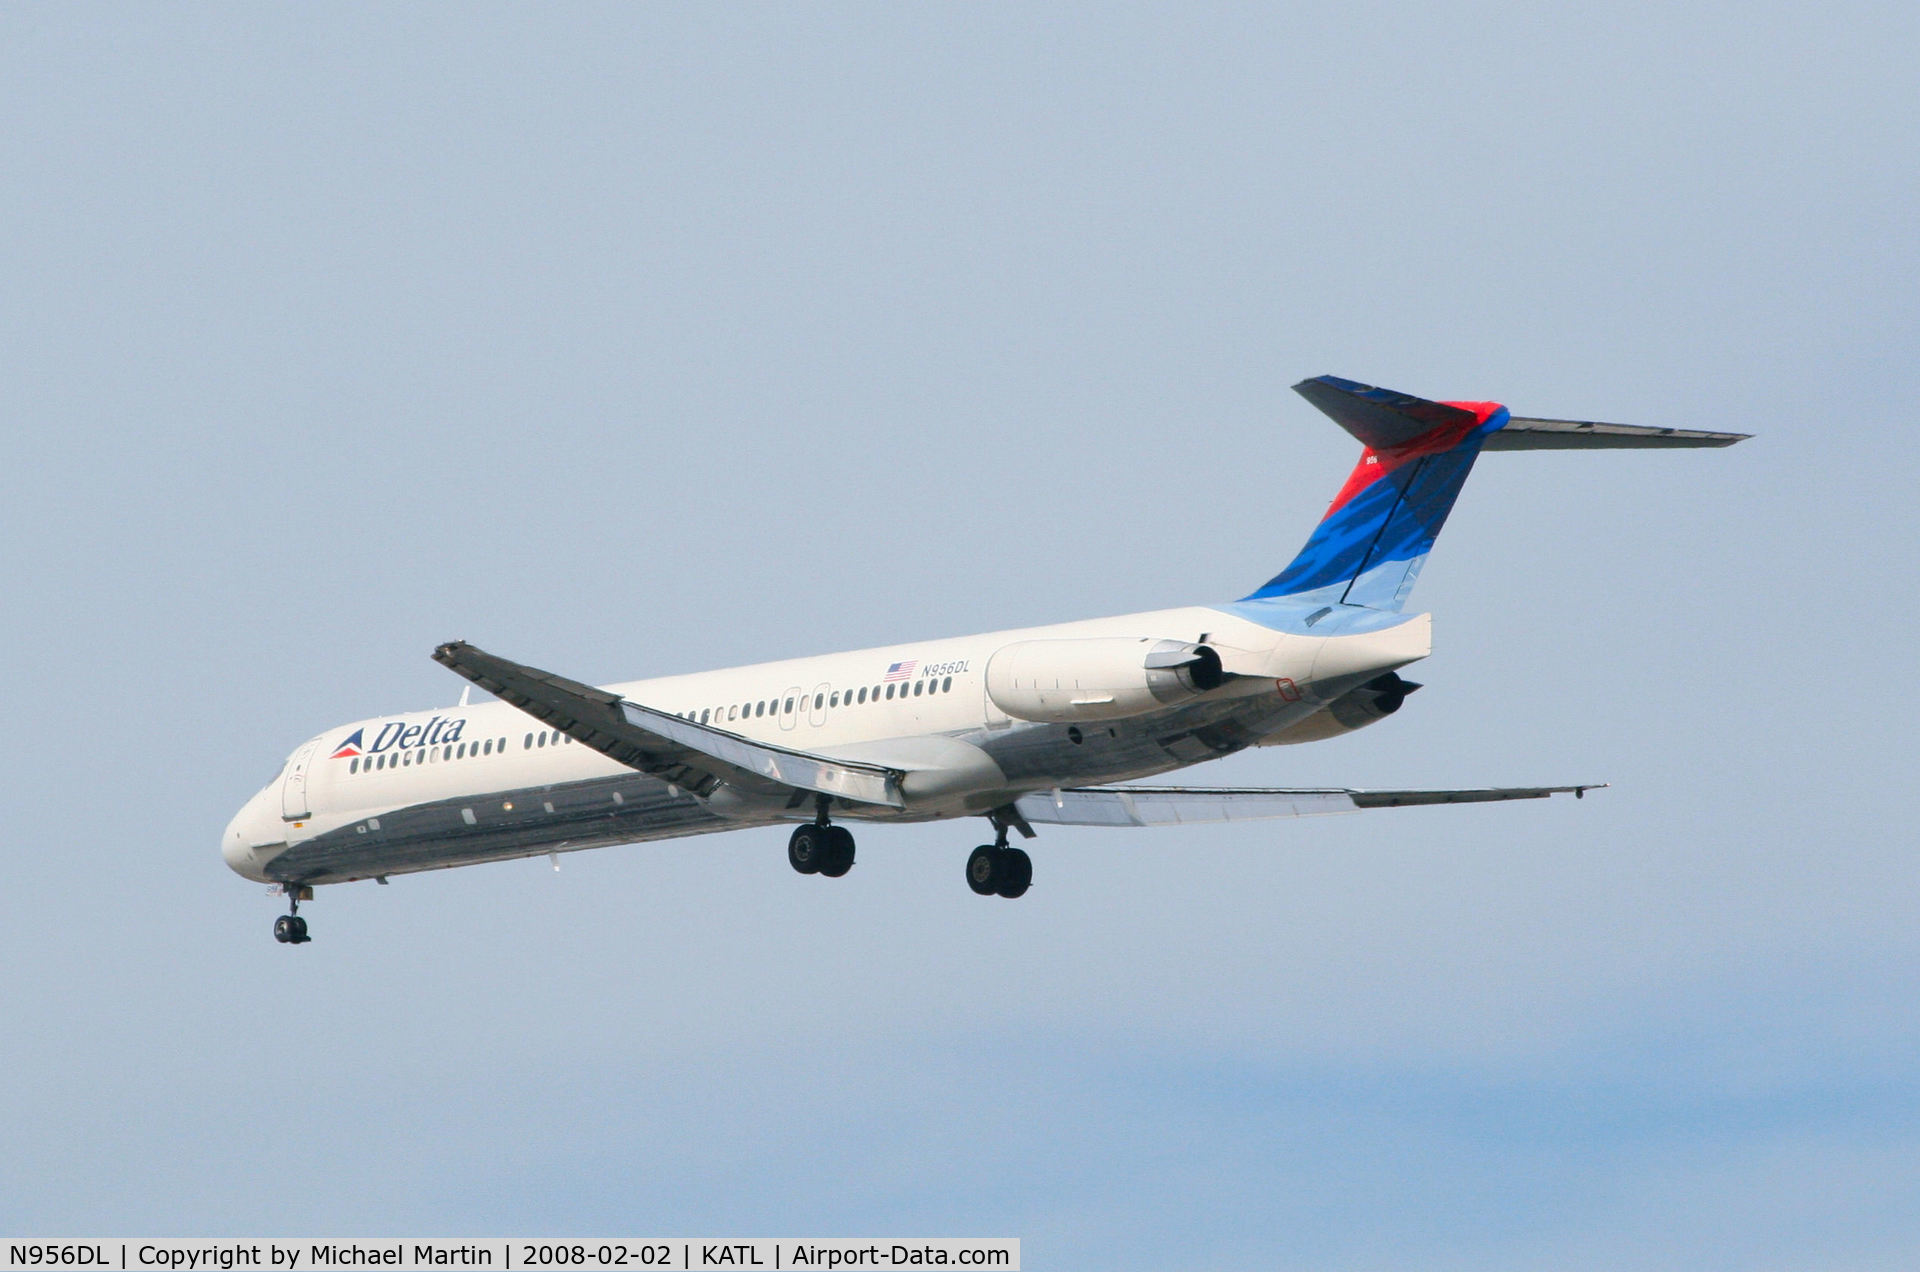 N956DL, 1990 McDonnell Douglas MD-88 C/N 49887, Over the numbers of 26R